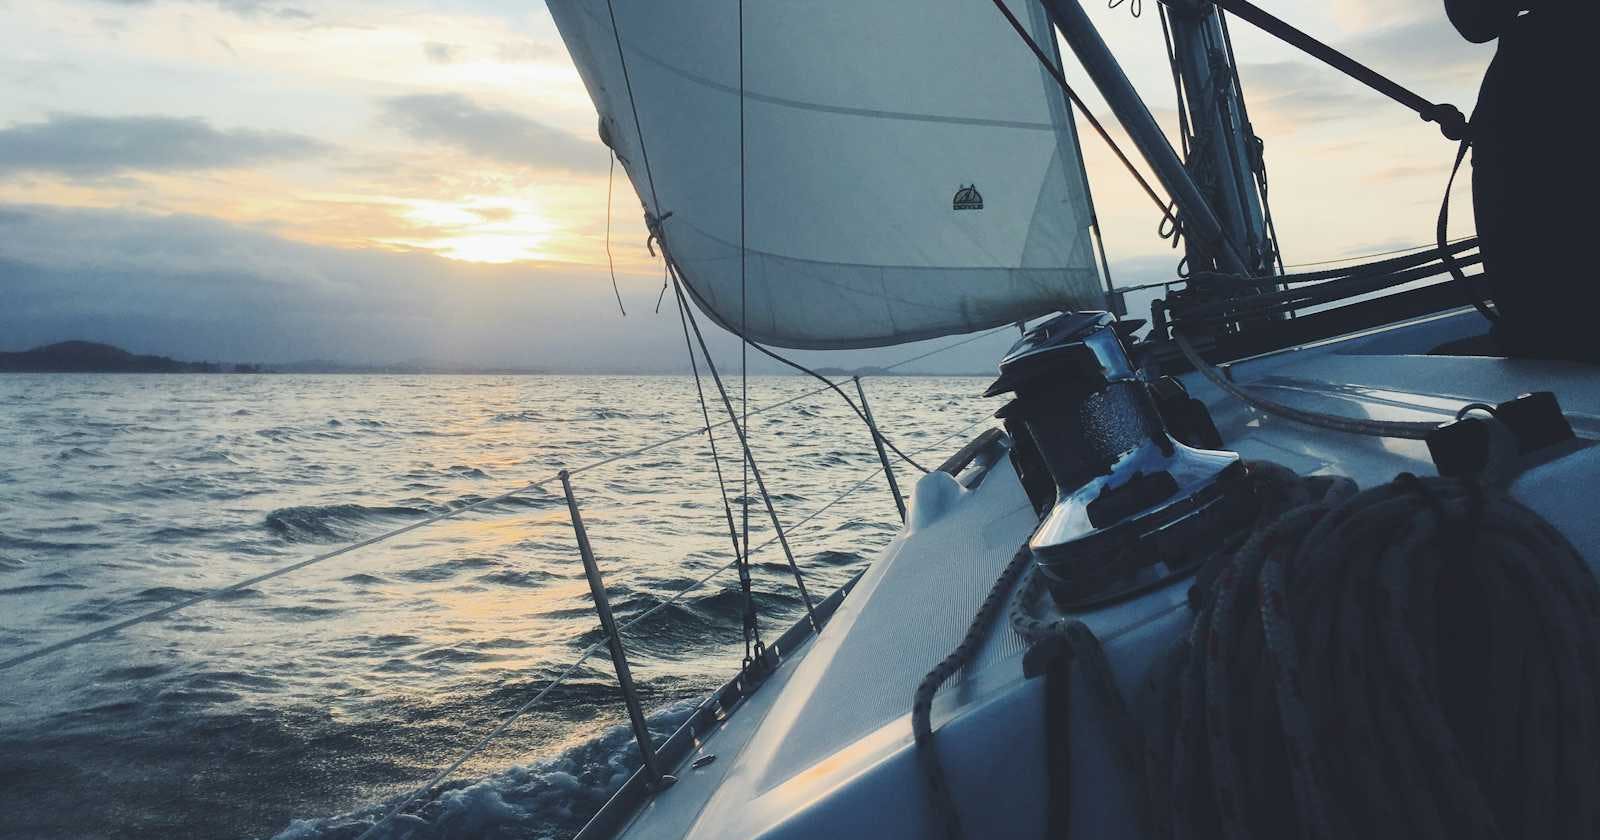 Setting Sail with VIP: An Epic Adventure in iOS App Development!